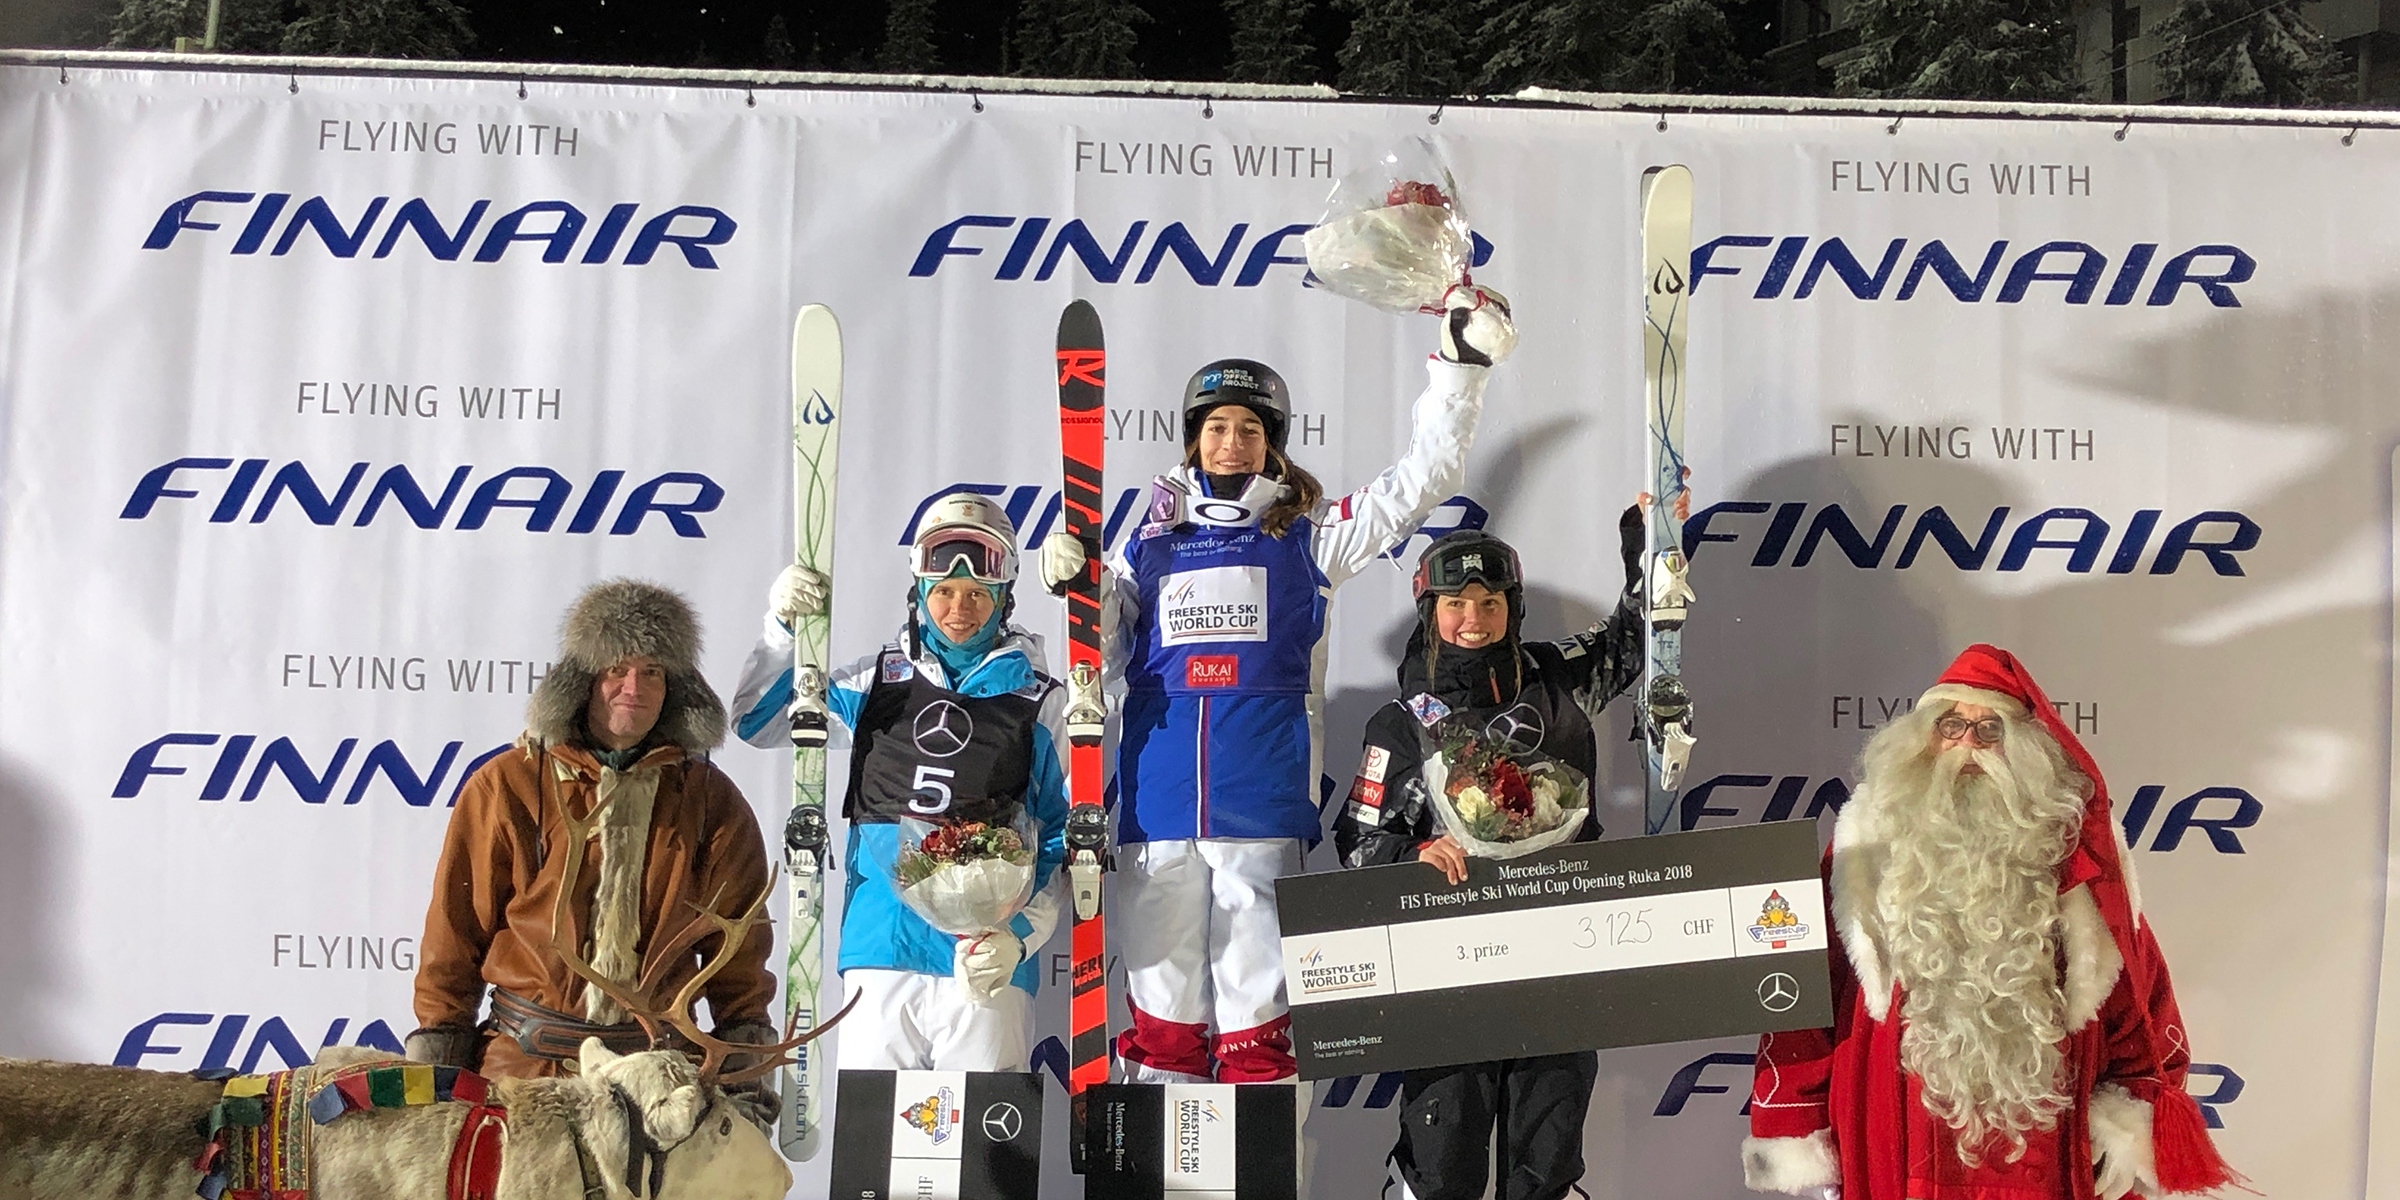 Tess Johnson, who took third in Friday's FIS Freestyle World Cup moguls event, shared the podium with France’s Perrine Laffont, who came in first, and Kazakhstan’s Yulia Galysheva, who came in second. (Matt Gnoza - U.S. Ski & Snowboard)